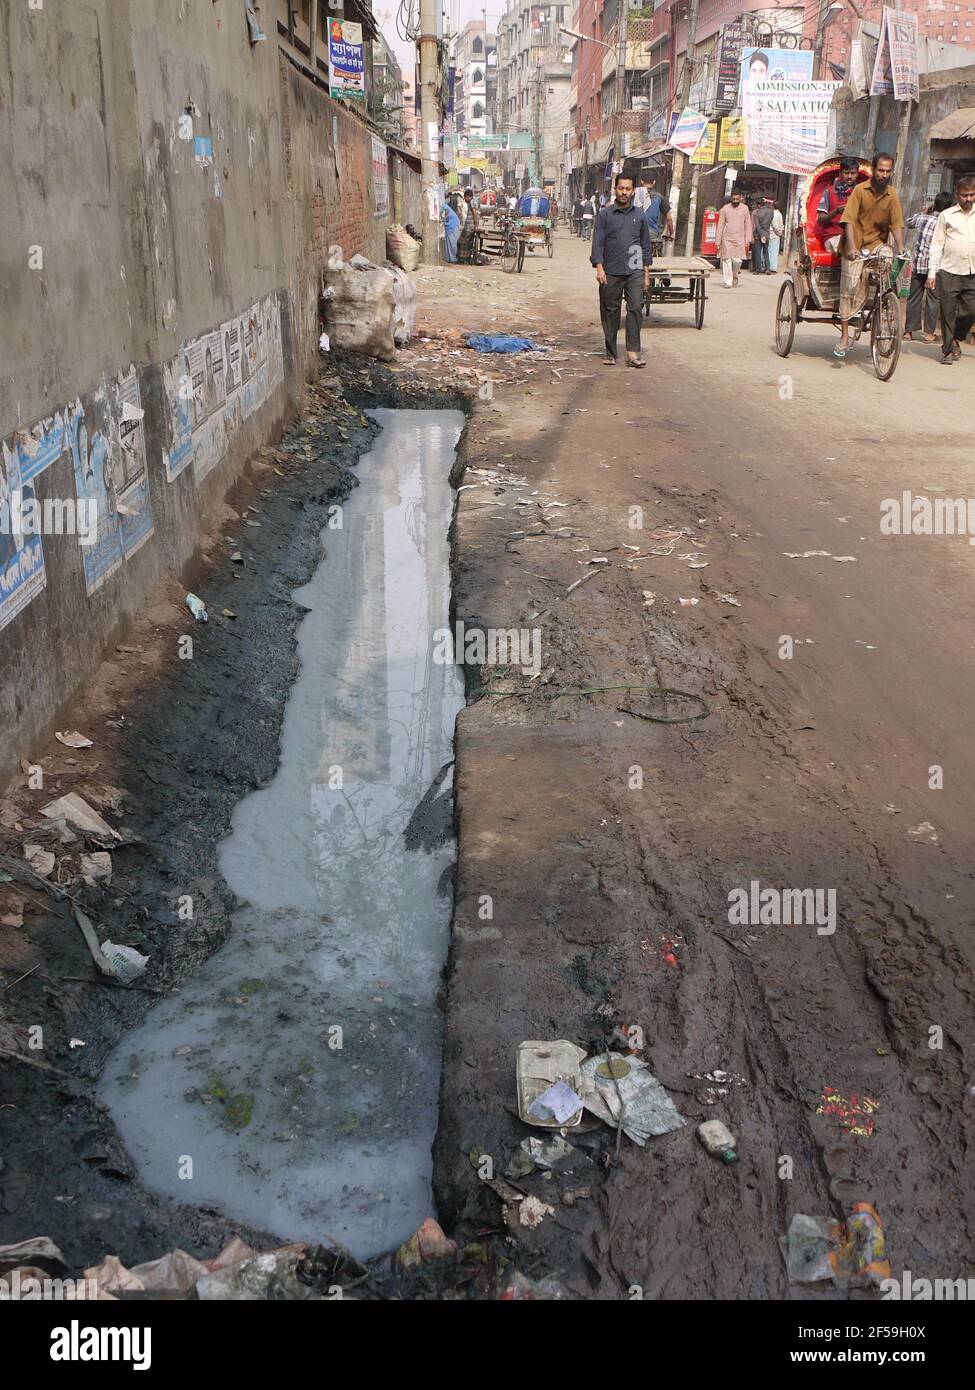 Toxic water flow in the streets of Hazaribagh, Dhaka, Bangladesh because of tanneries Stock Photo